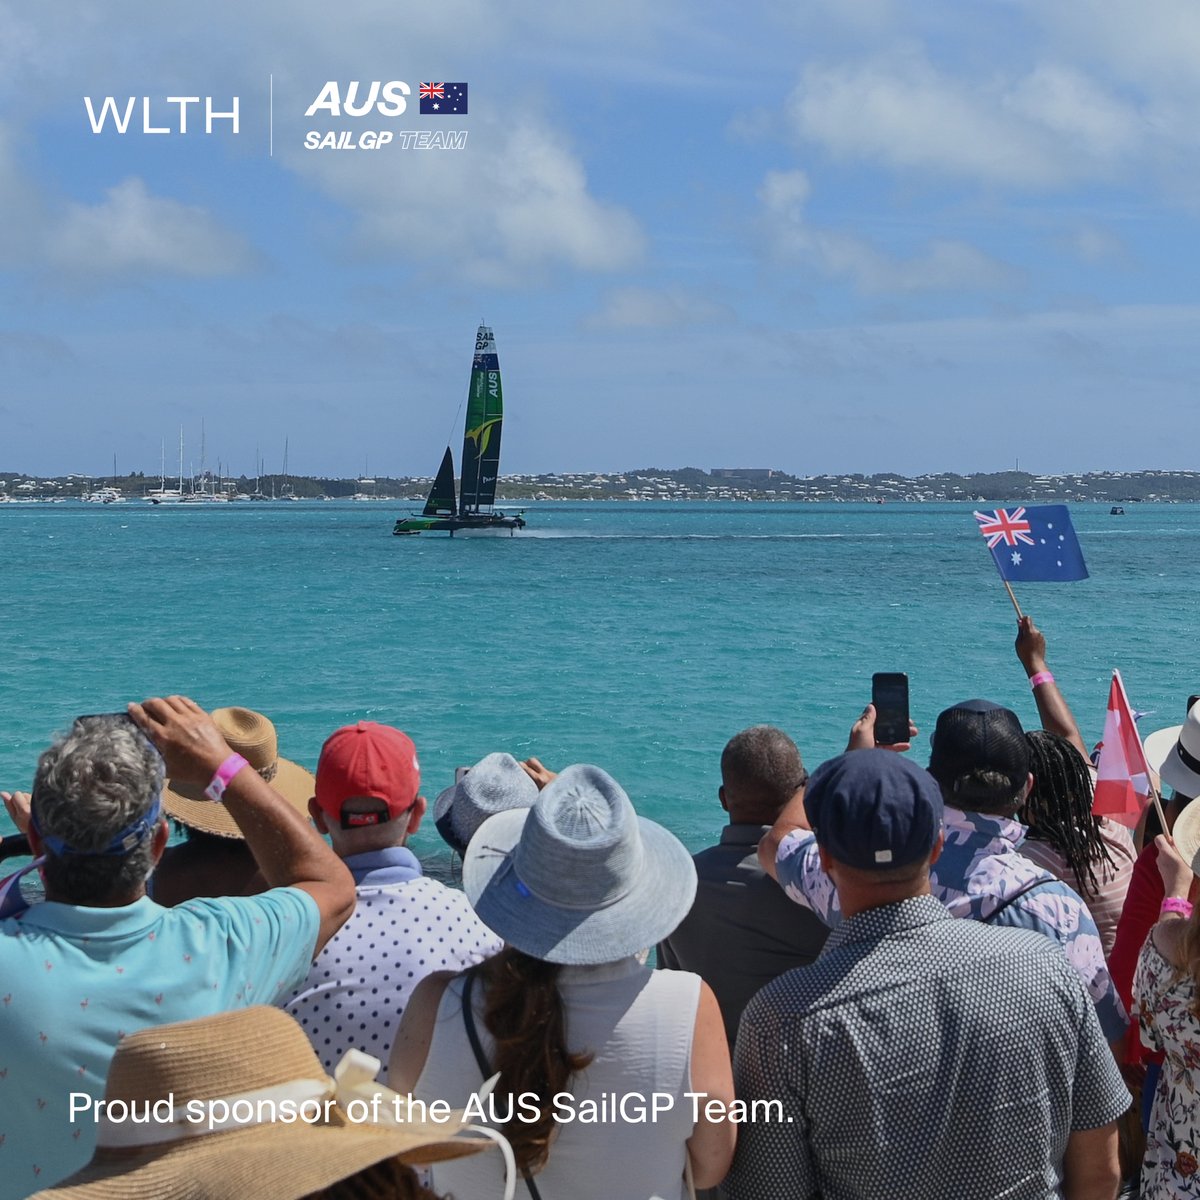 Support the Australian SailGP Team on their quest for sailing glory for the 4th time in a row! As an impact lender aiming to make waves in the industry, WLTH is proud to be partnered with another purpose-driven organisation.

#sailgpaus #loansfortheoceans #impactlender